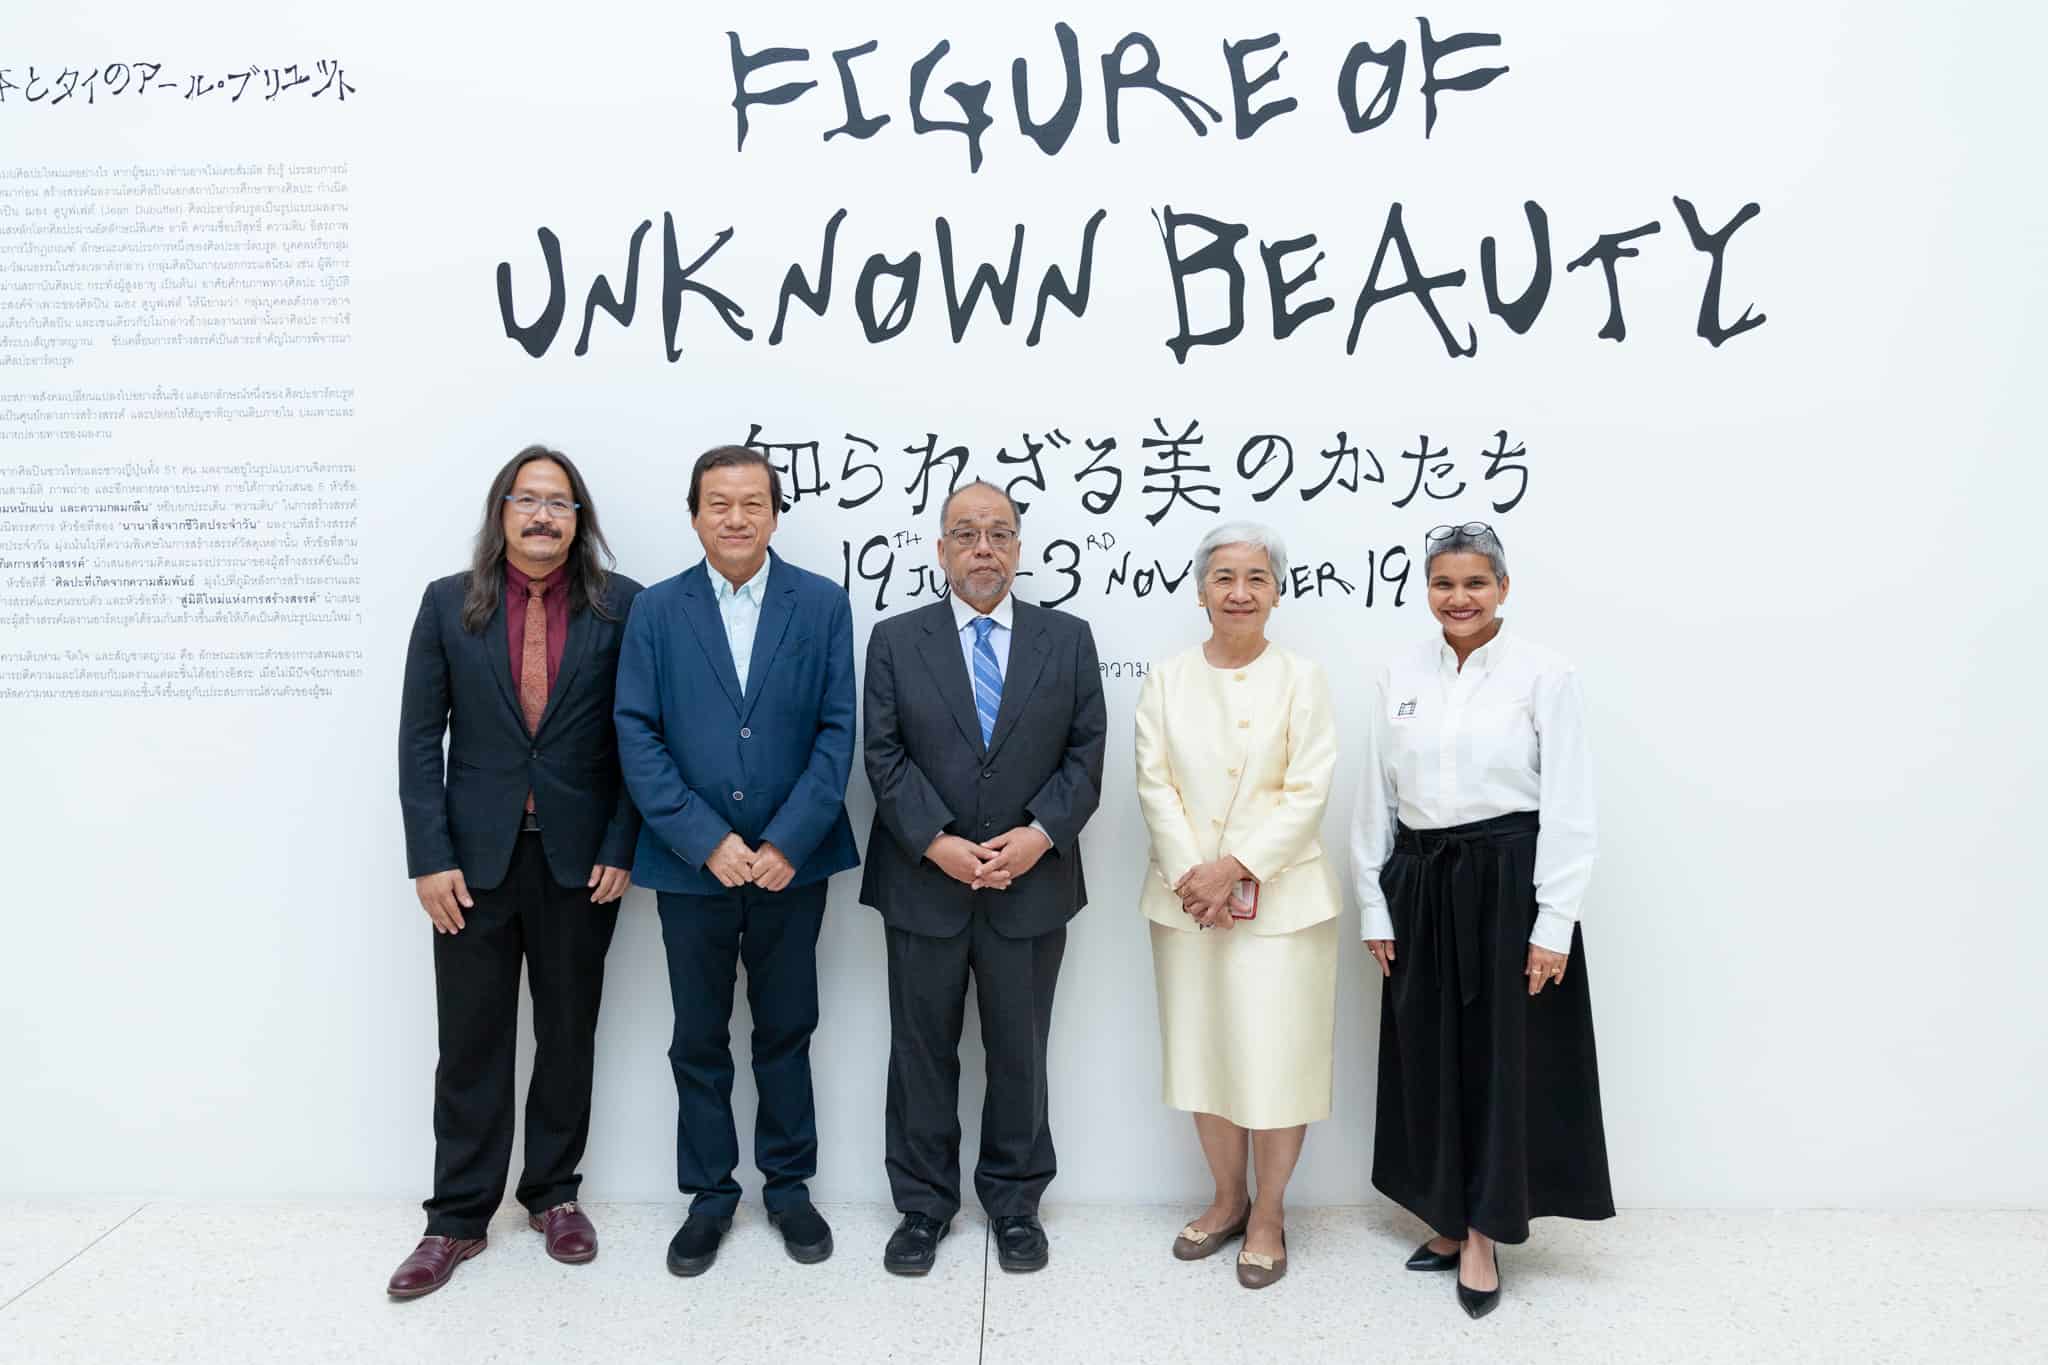 Thailand and Japan ART BRUT: Figure of Unknown Beauty